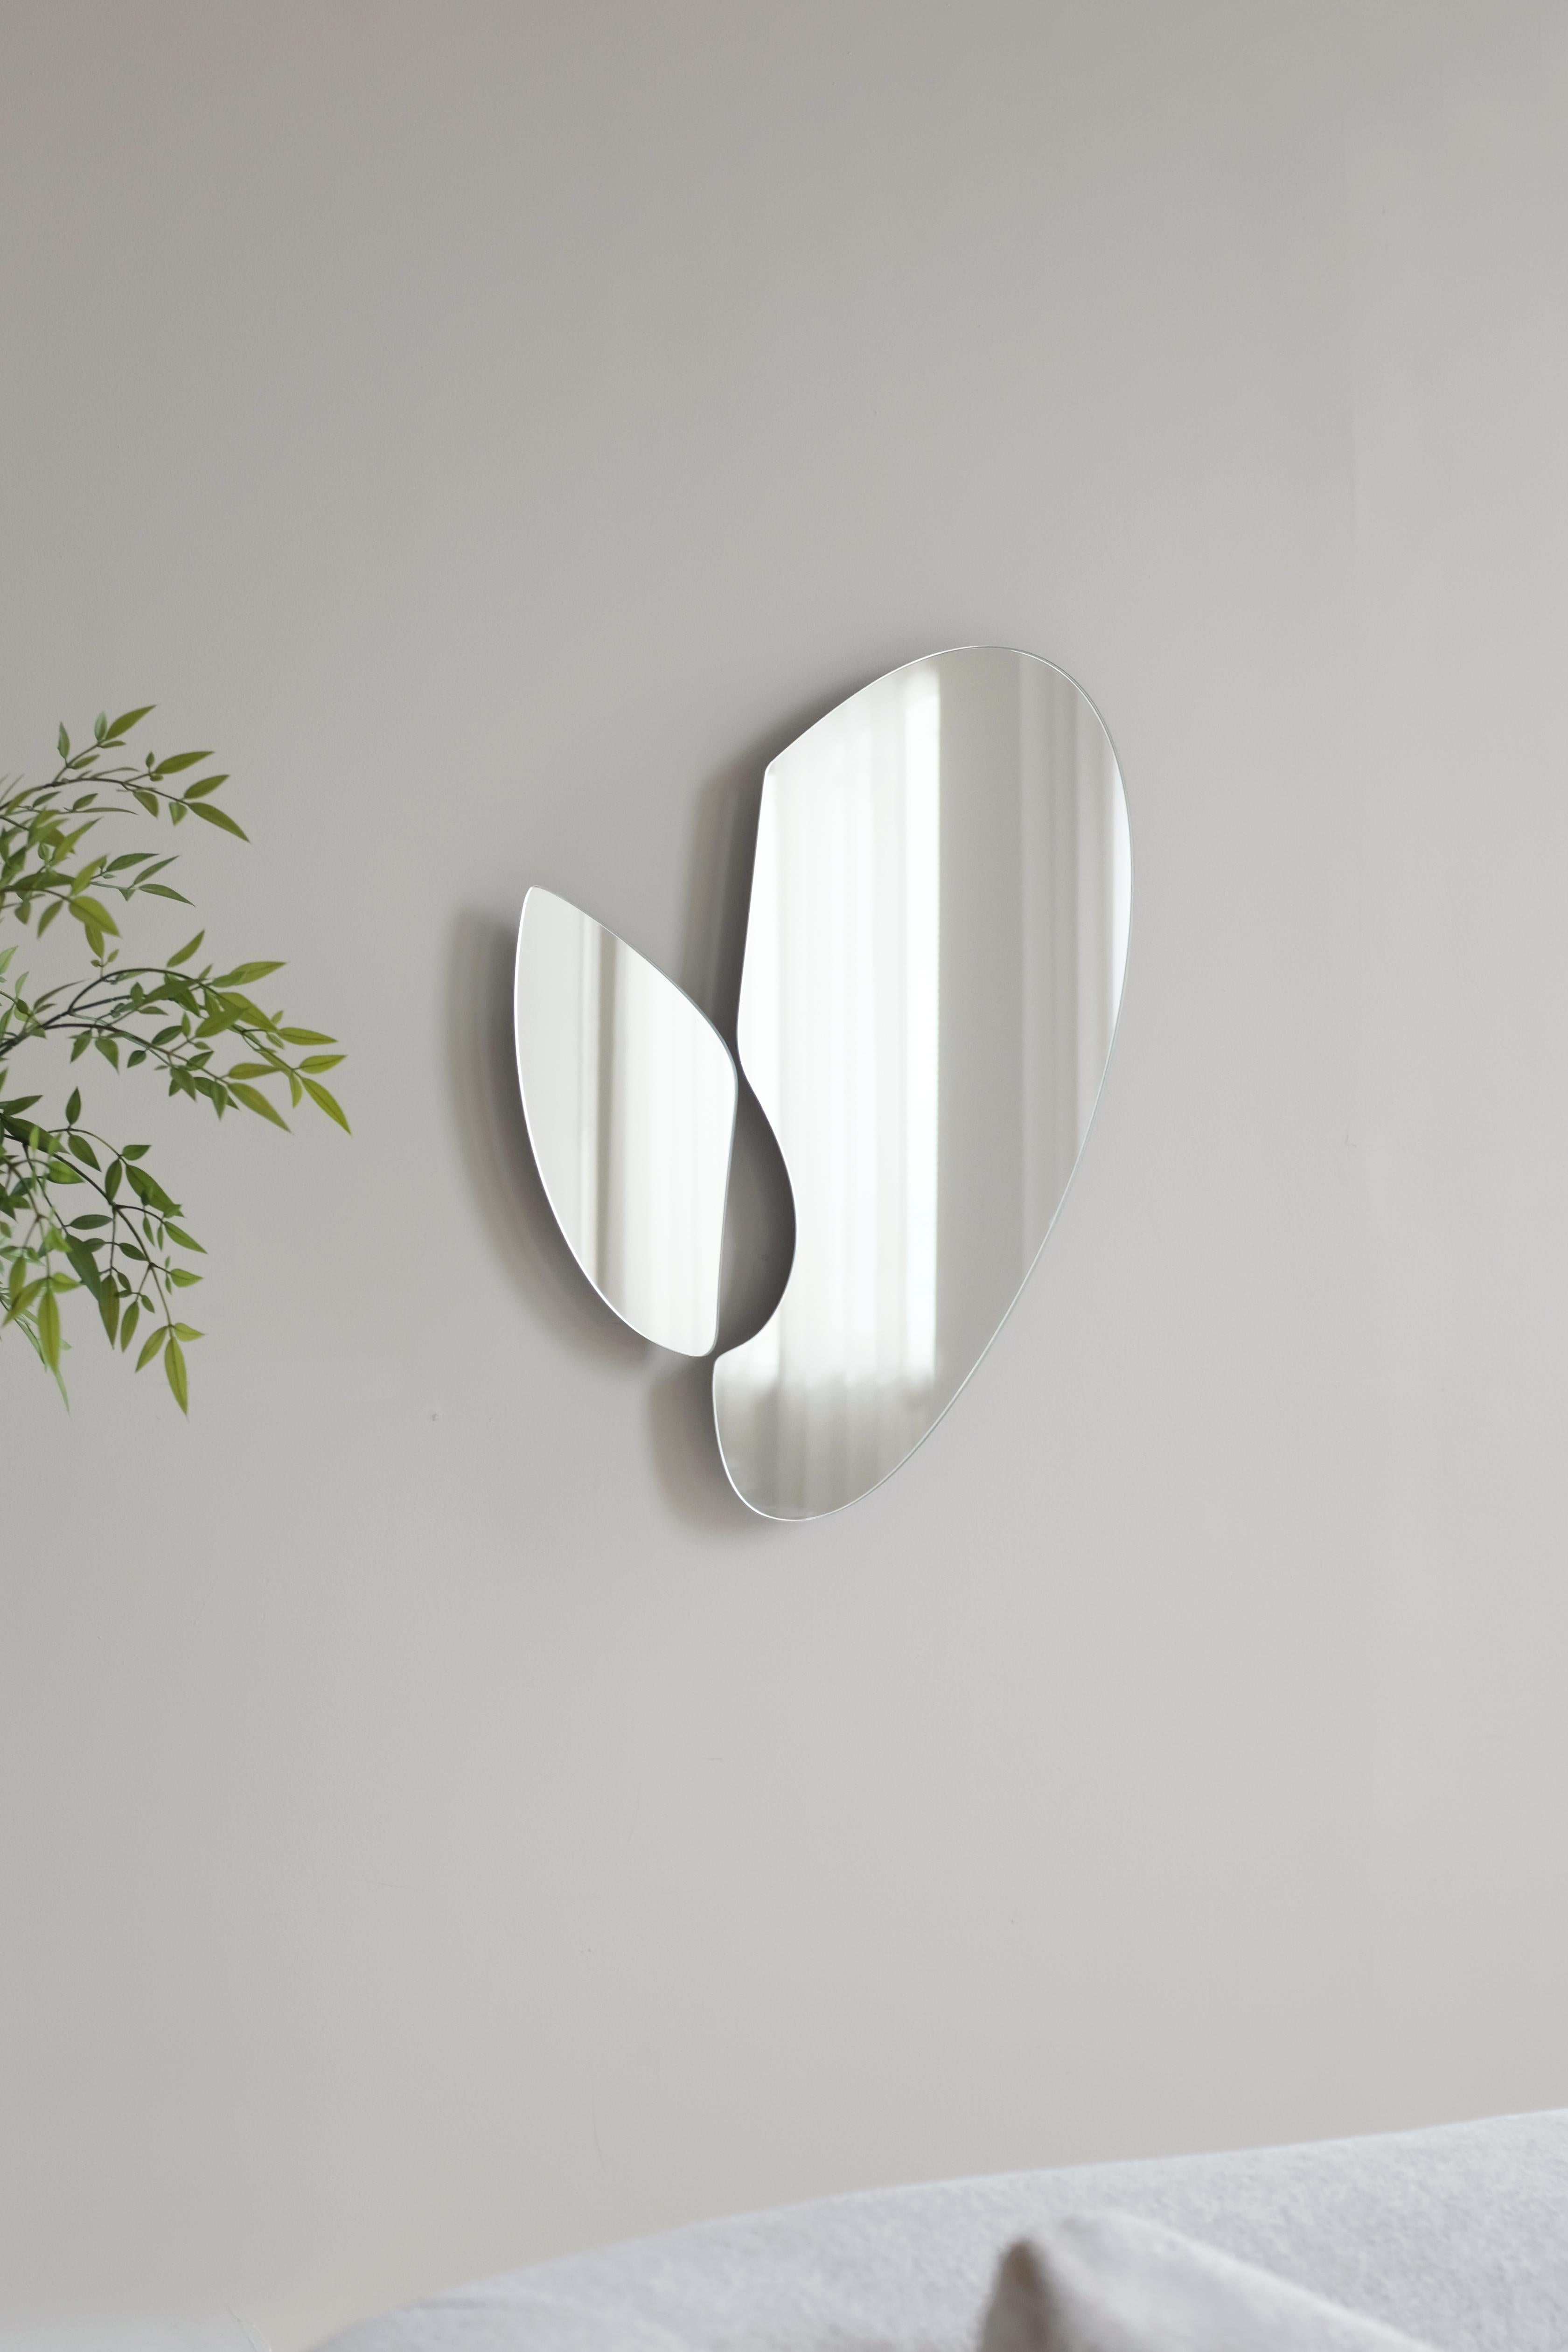 'Poet' by Soo Joo is an asymmetric organic wall mirror. It has a unique novel design, while simultaneously having a timeless beauty that can be enjoyed for decades. The artist creatively reimagines the essence of traditional Korean aesthetics into a